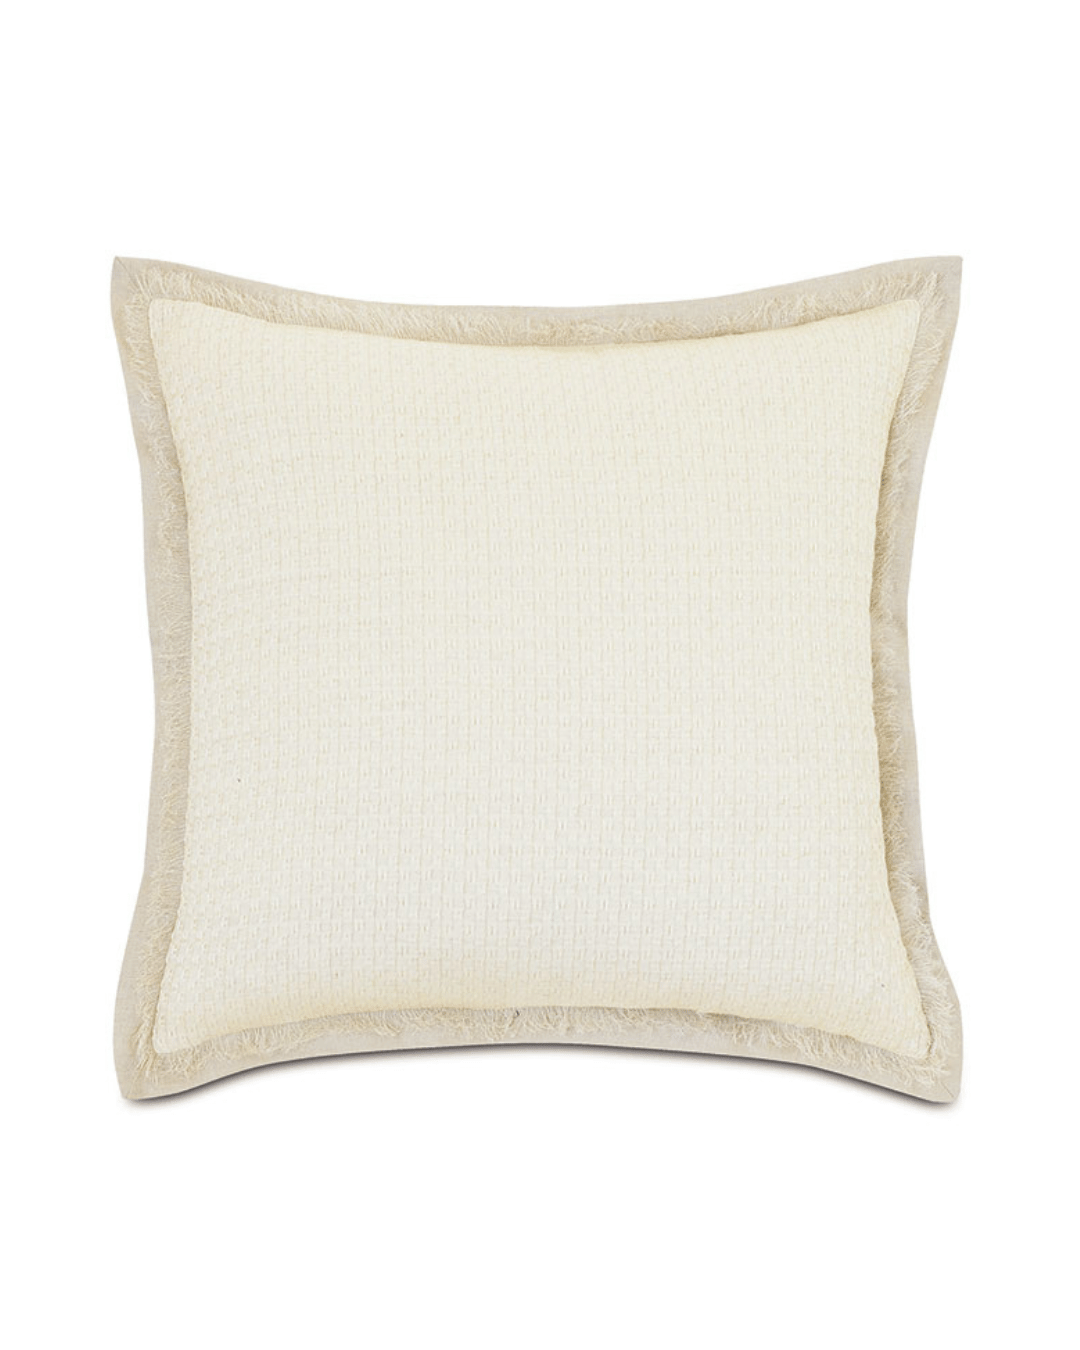 A square, cream-colored TEXTURED MATELASSE EURO SHAM decorative pillow with a Bungalow style woven texture and a lighter, textured border around the edges. The pillow has a soft, inviting appearance by Eastern Accents.